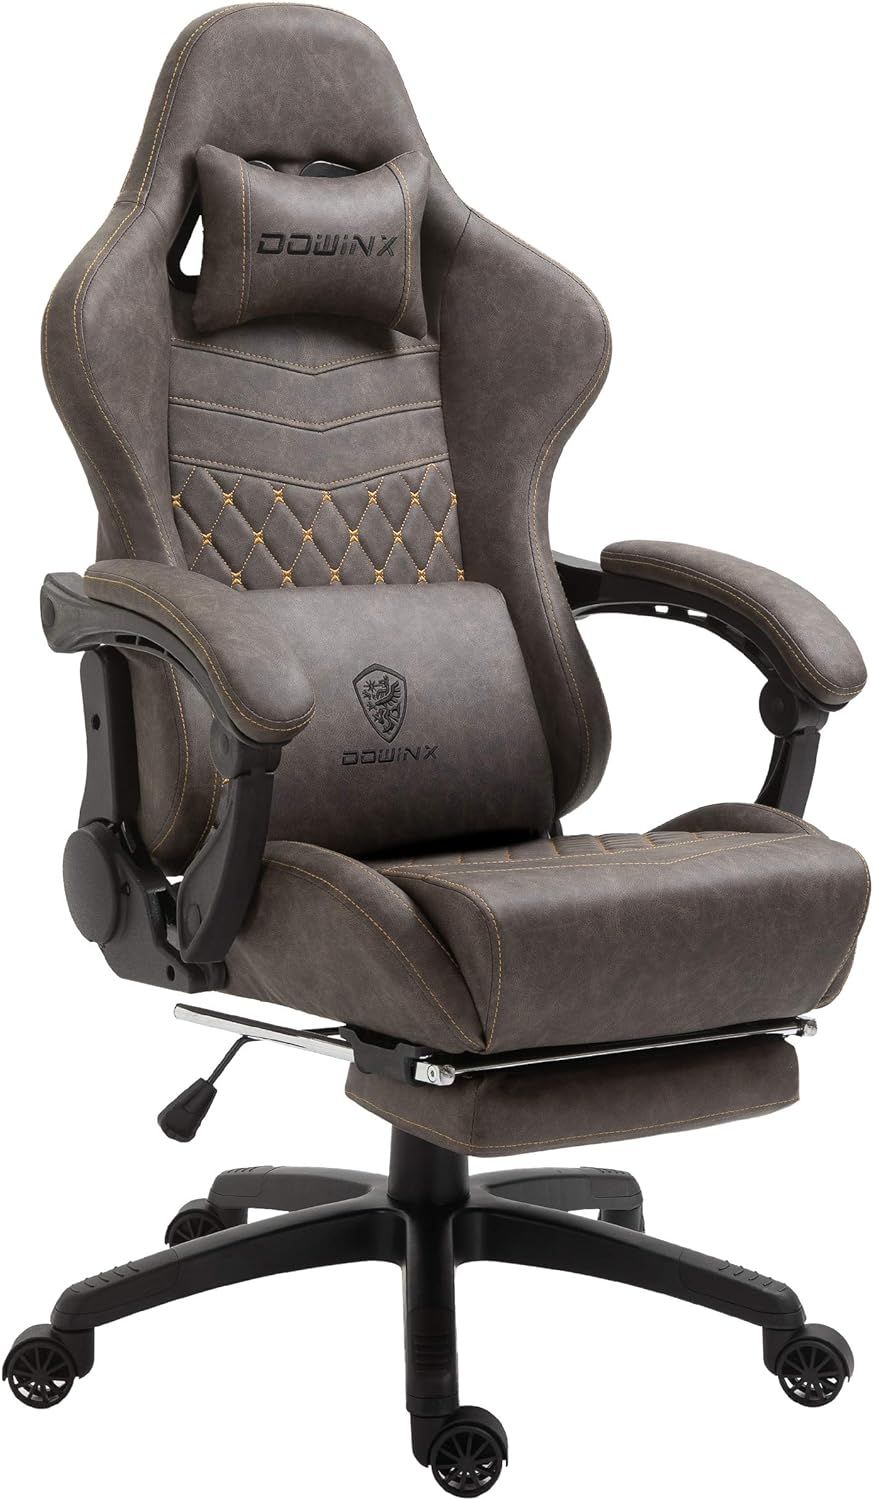 Dowinx Gaming Chair with Massage Lumbar Support